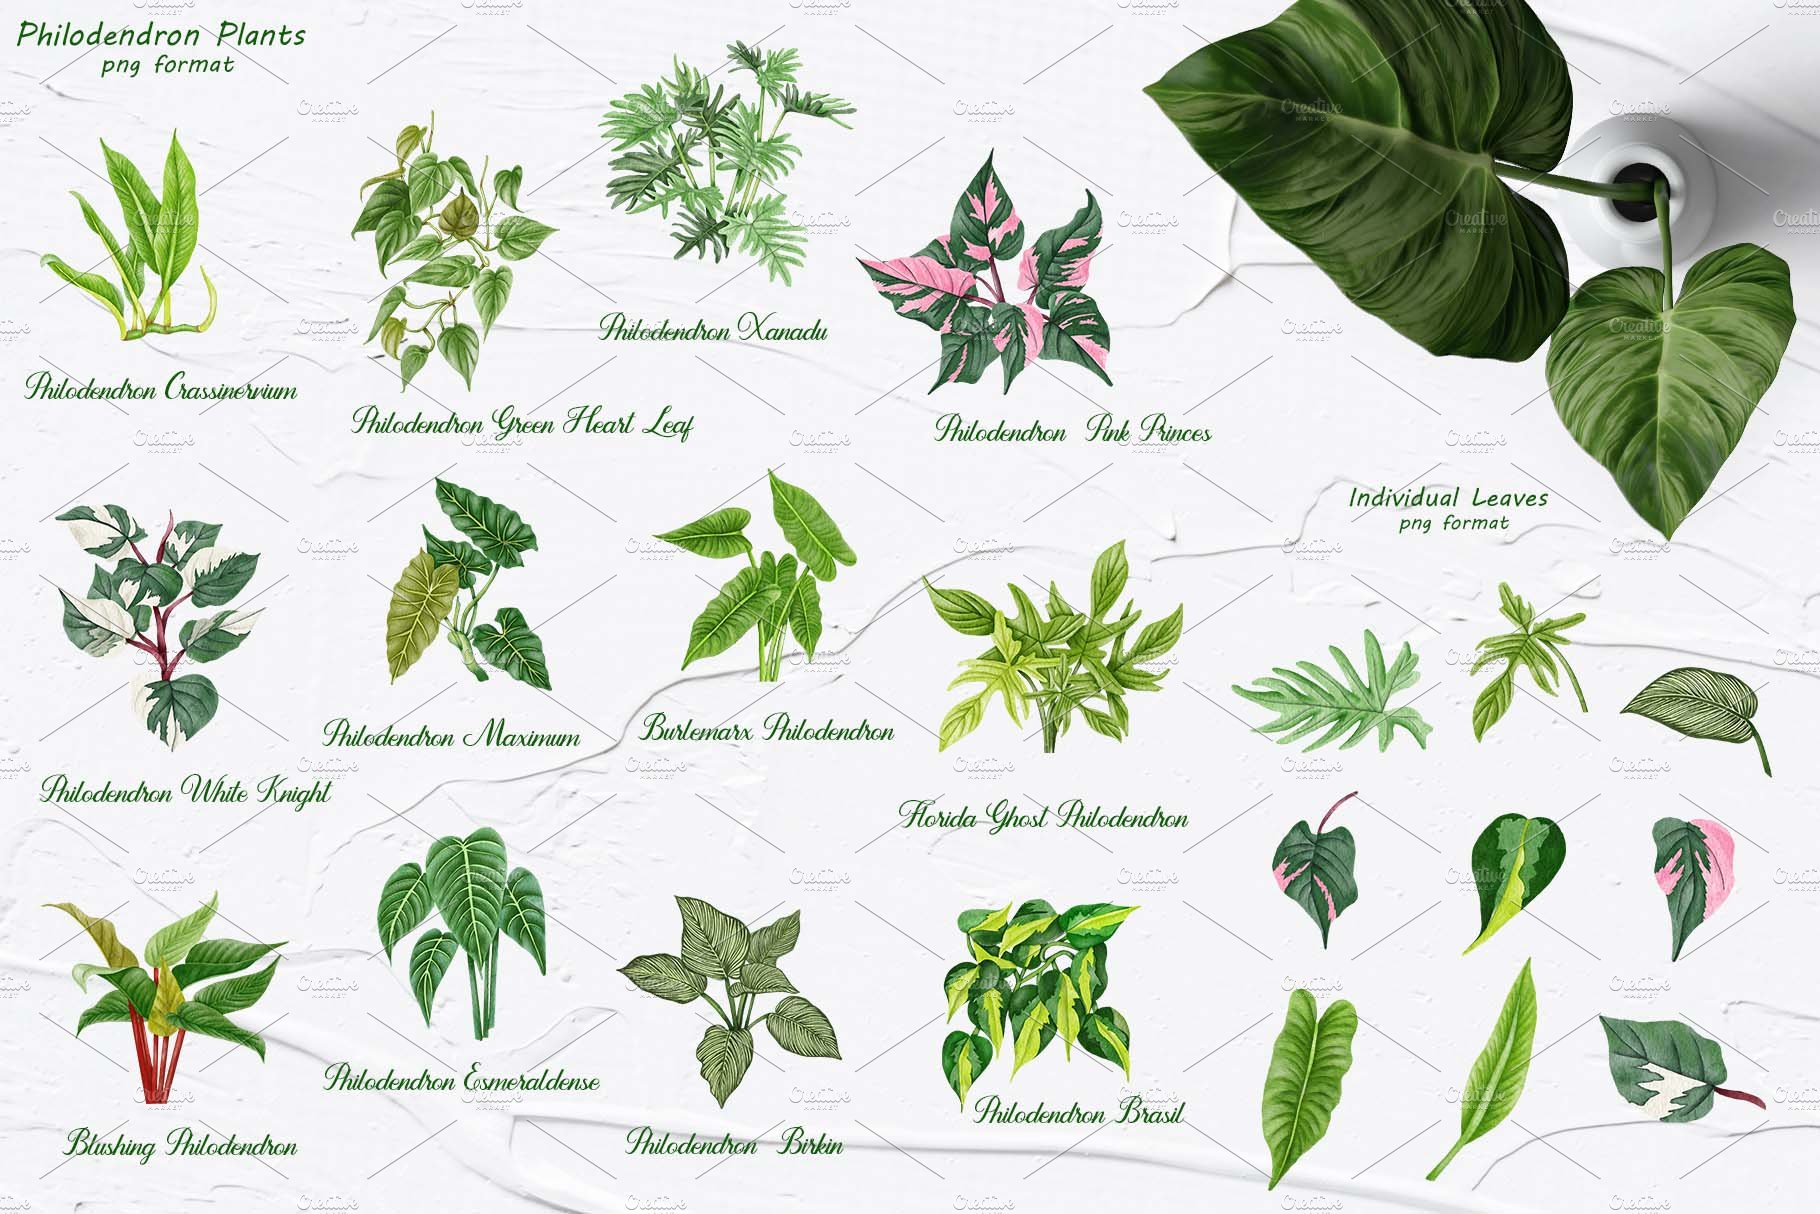 Diverse of philodendron plants.